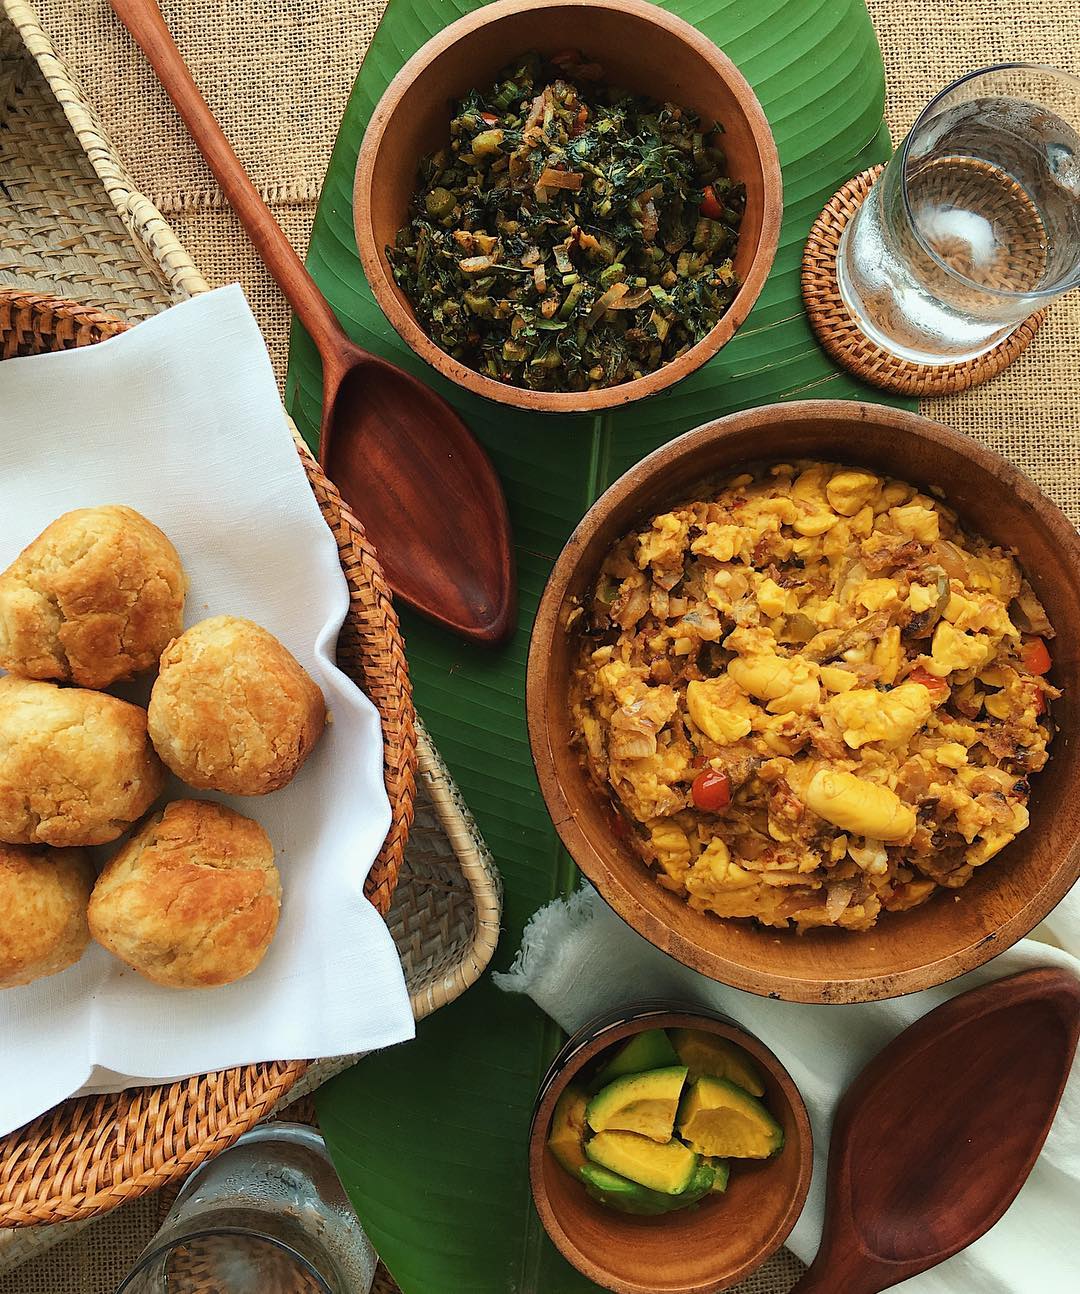 How to Reheat Ackee & Saltfish: A Quick Step-by-Step Guide